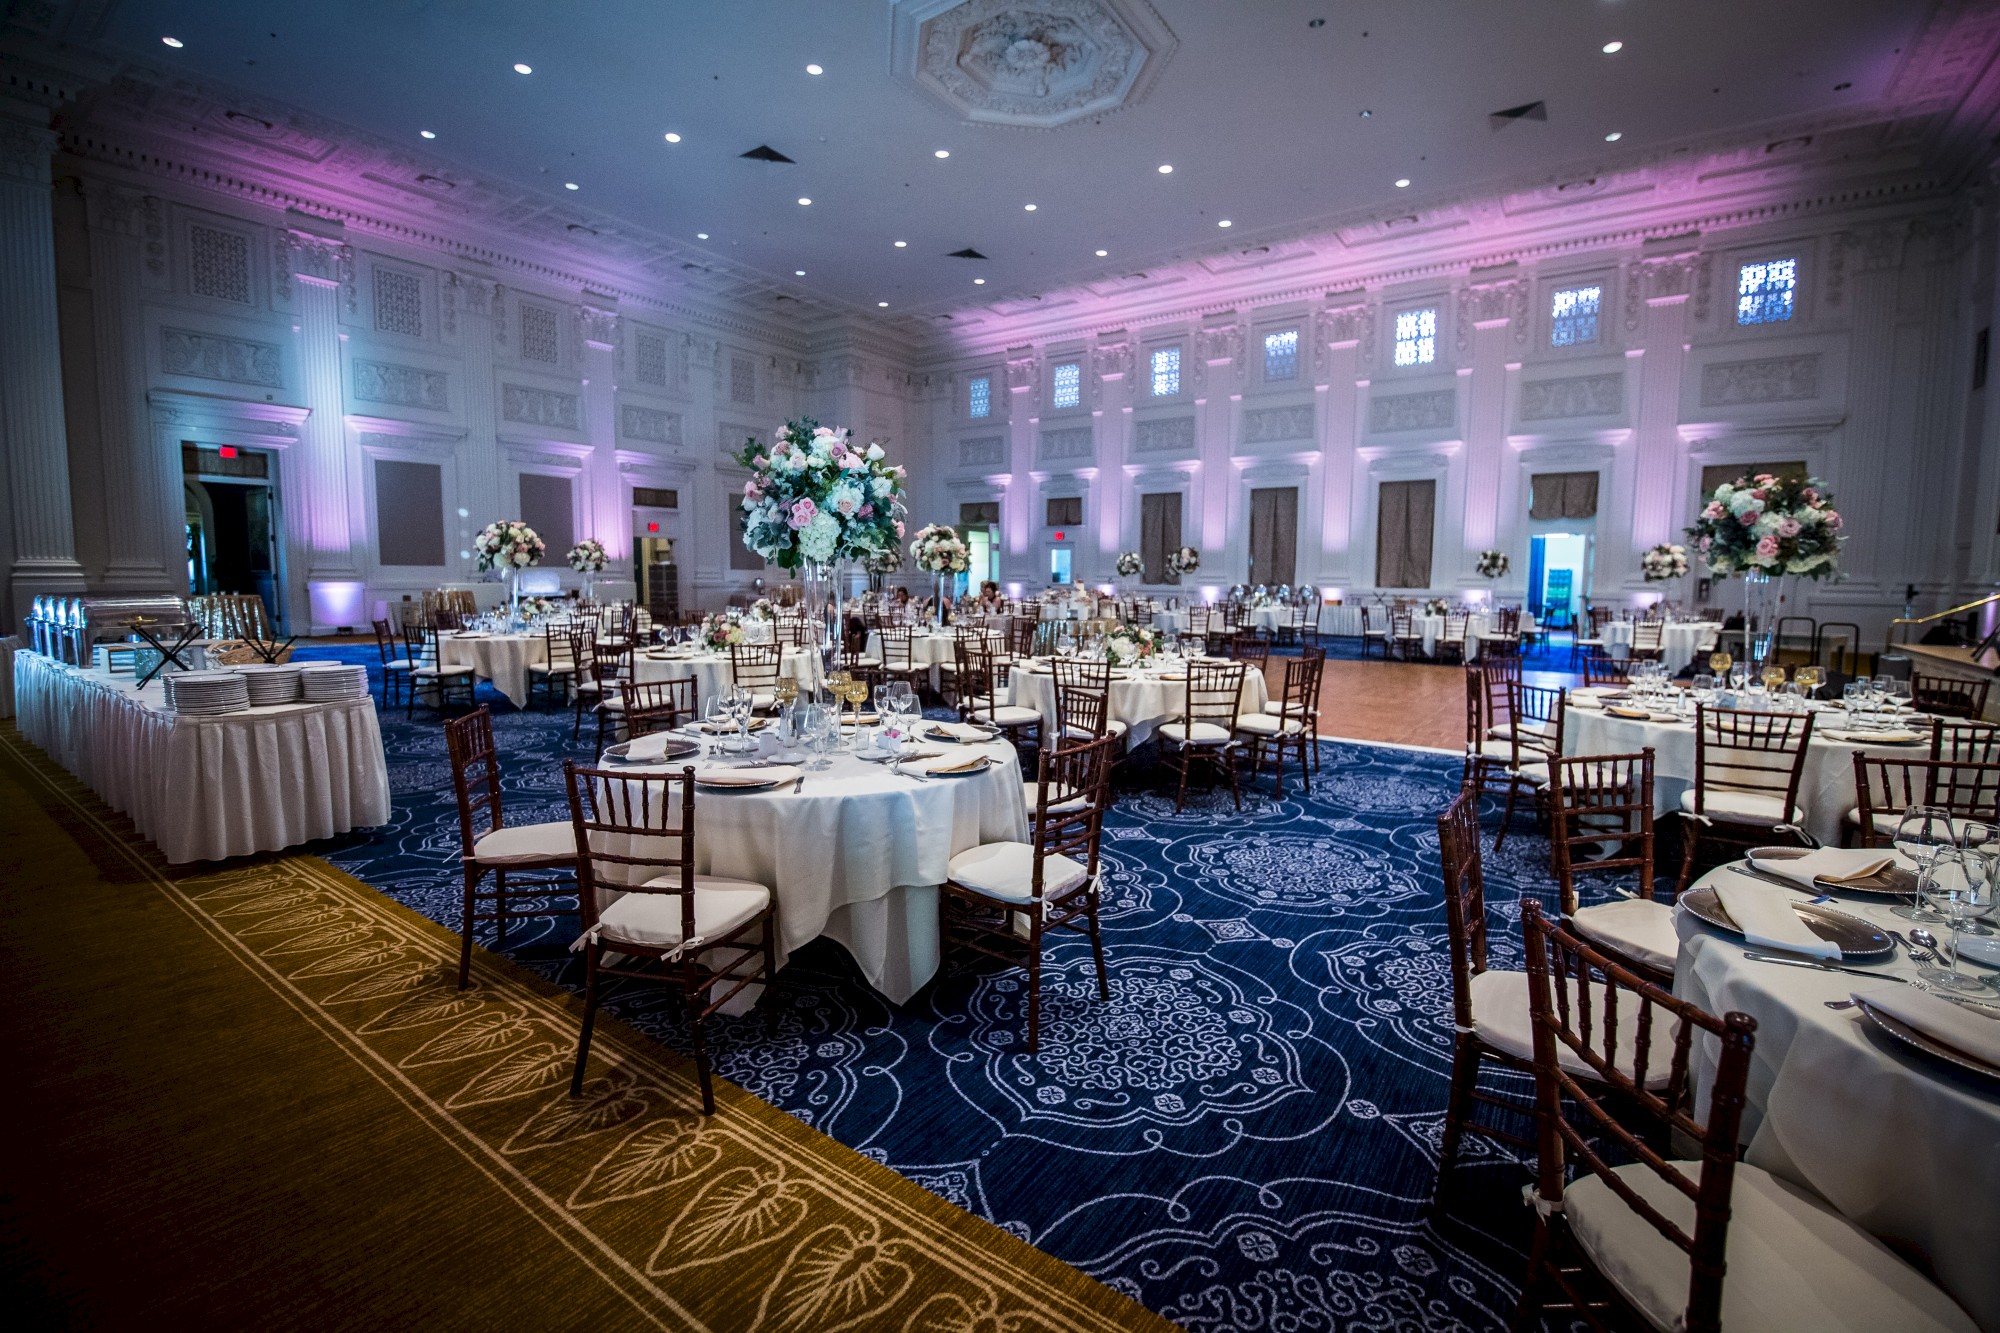 A large, elegantly decorated banquet hall with round tables, floral centerpieces, and purple lighting. Tables are set for a formal event.